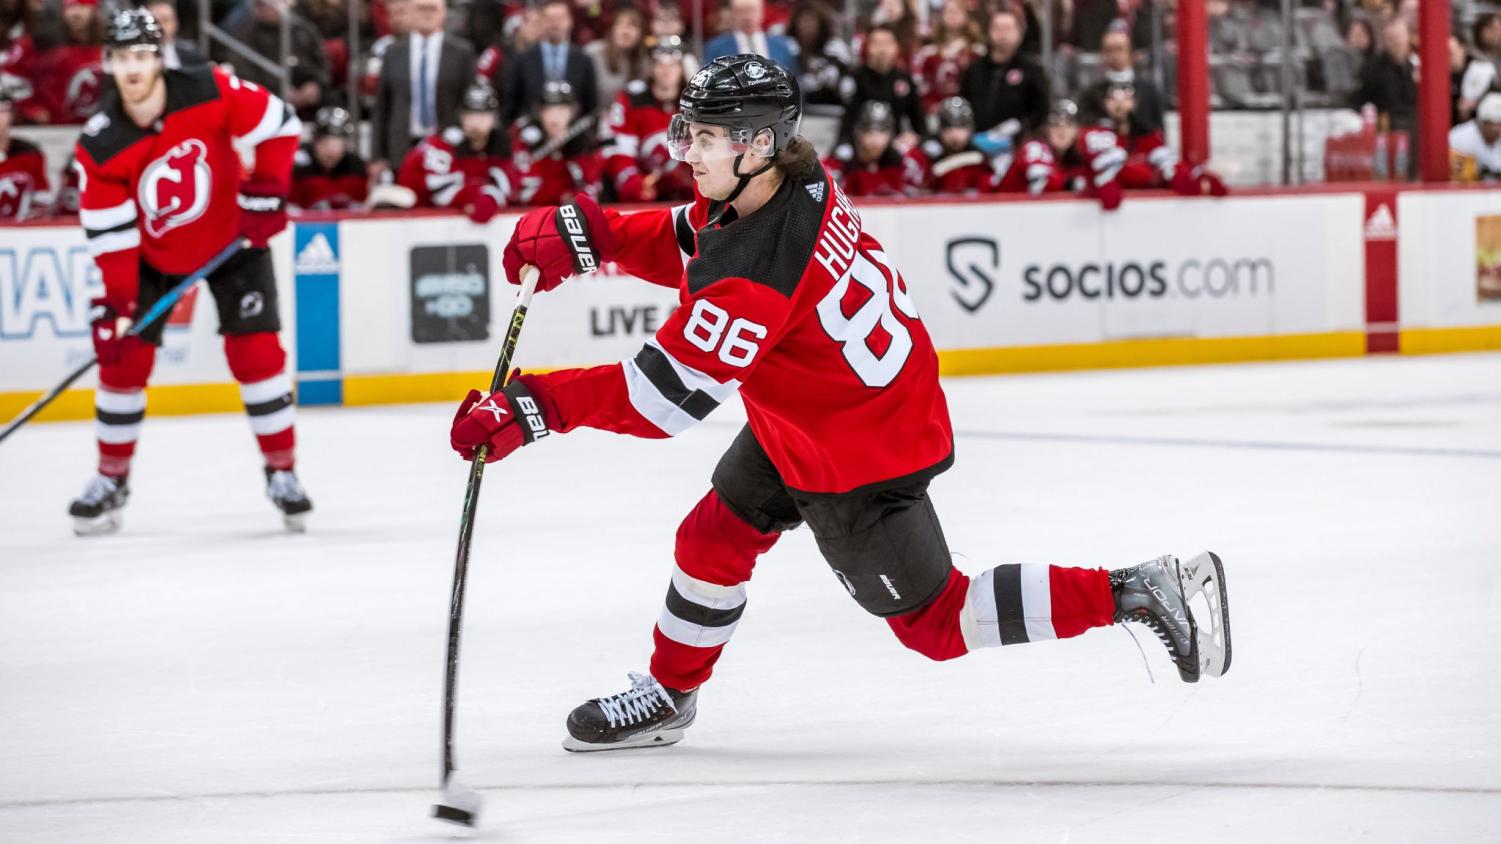 Devils set franchise record with road win over Flyers